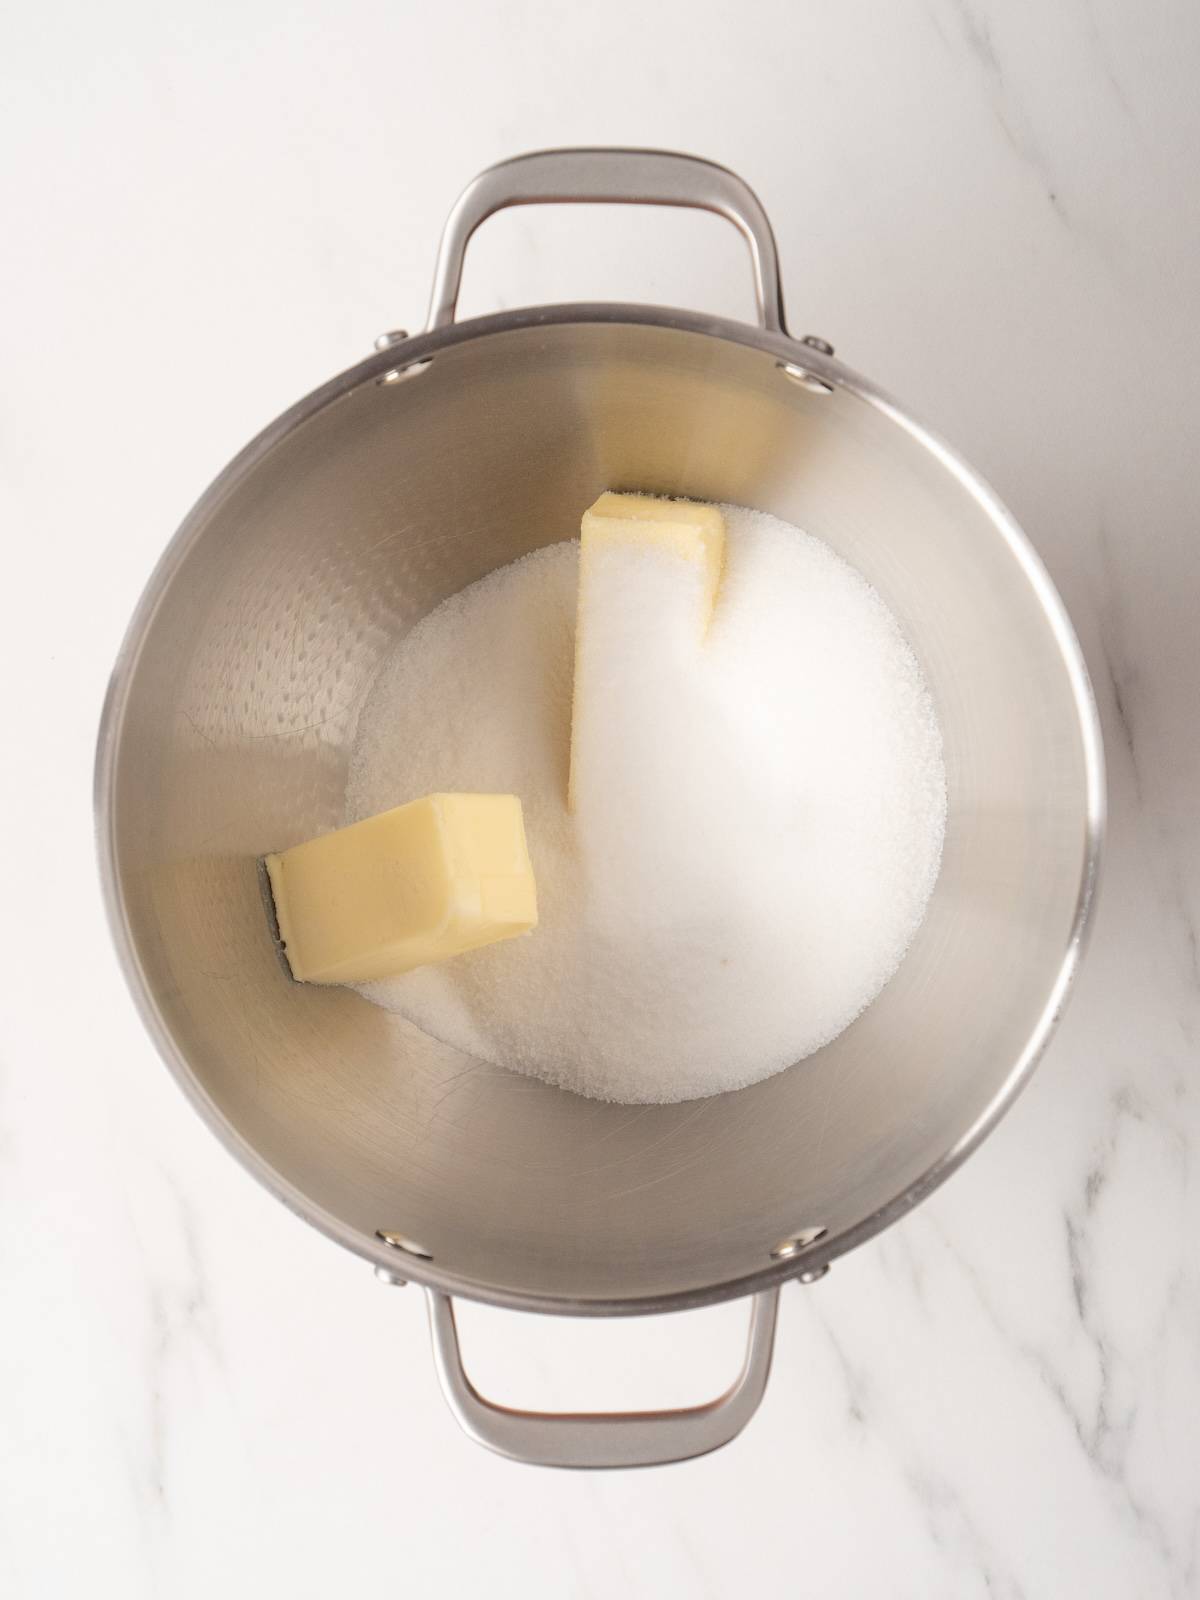 A stand mixer bowl with white sugar and butter added to the bowl.